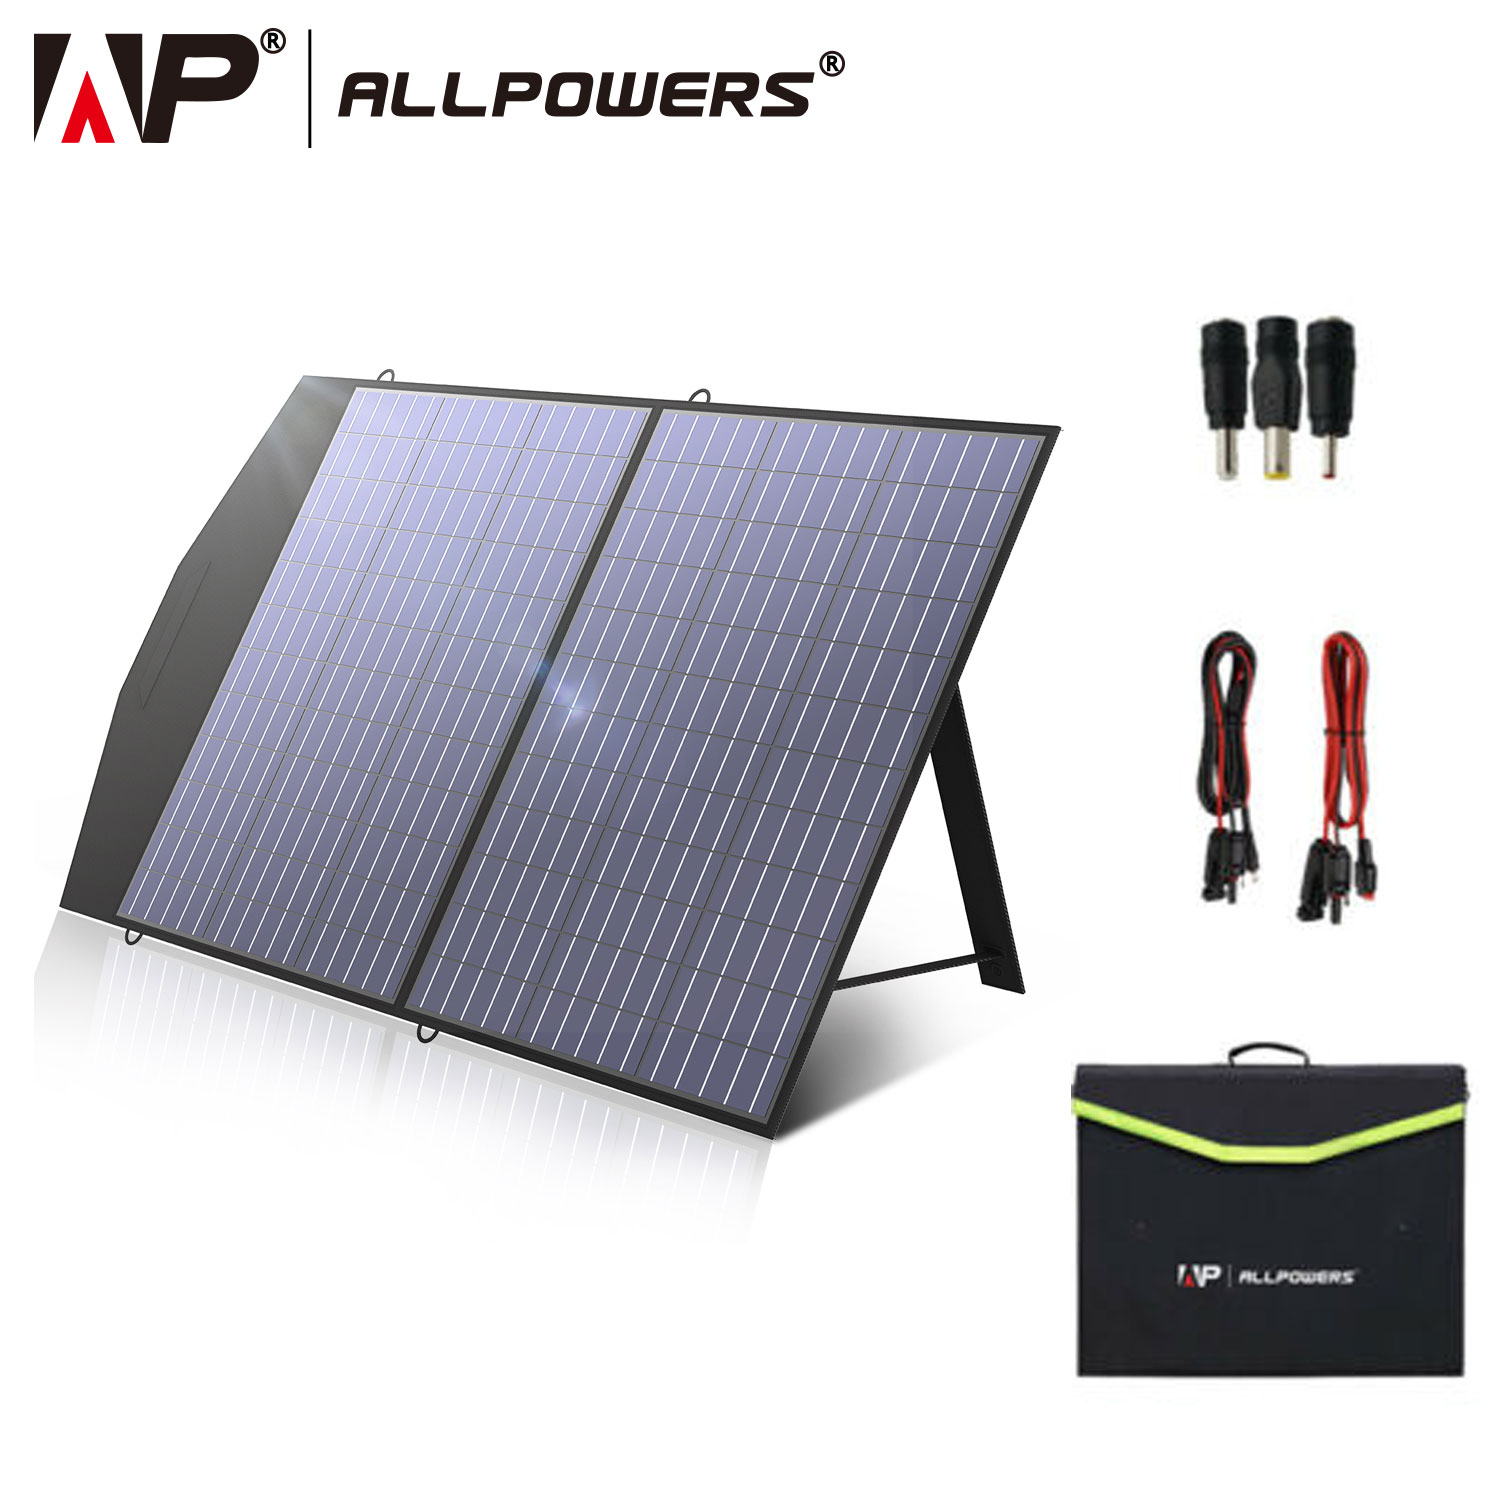 ALLPOWERS Solar Charger 18V100W Foldable Solar Panel Suit For Portable Power Station/Generator Outdoor Travel Camping